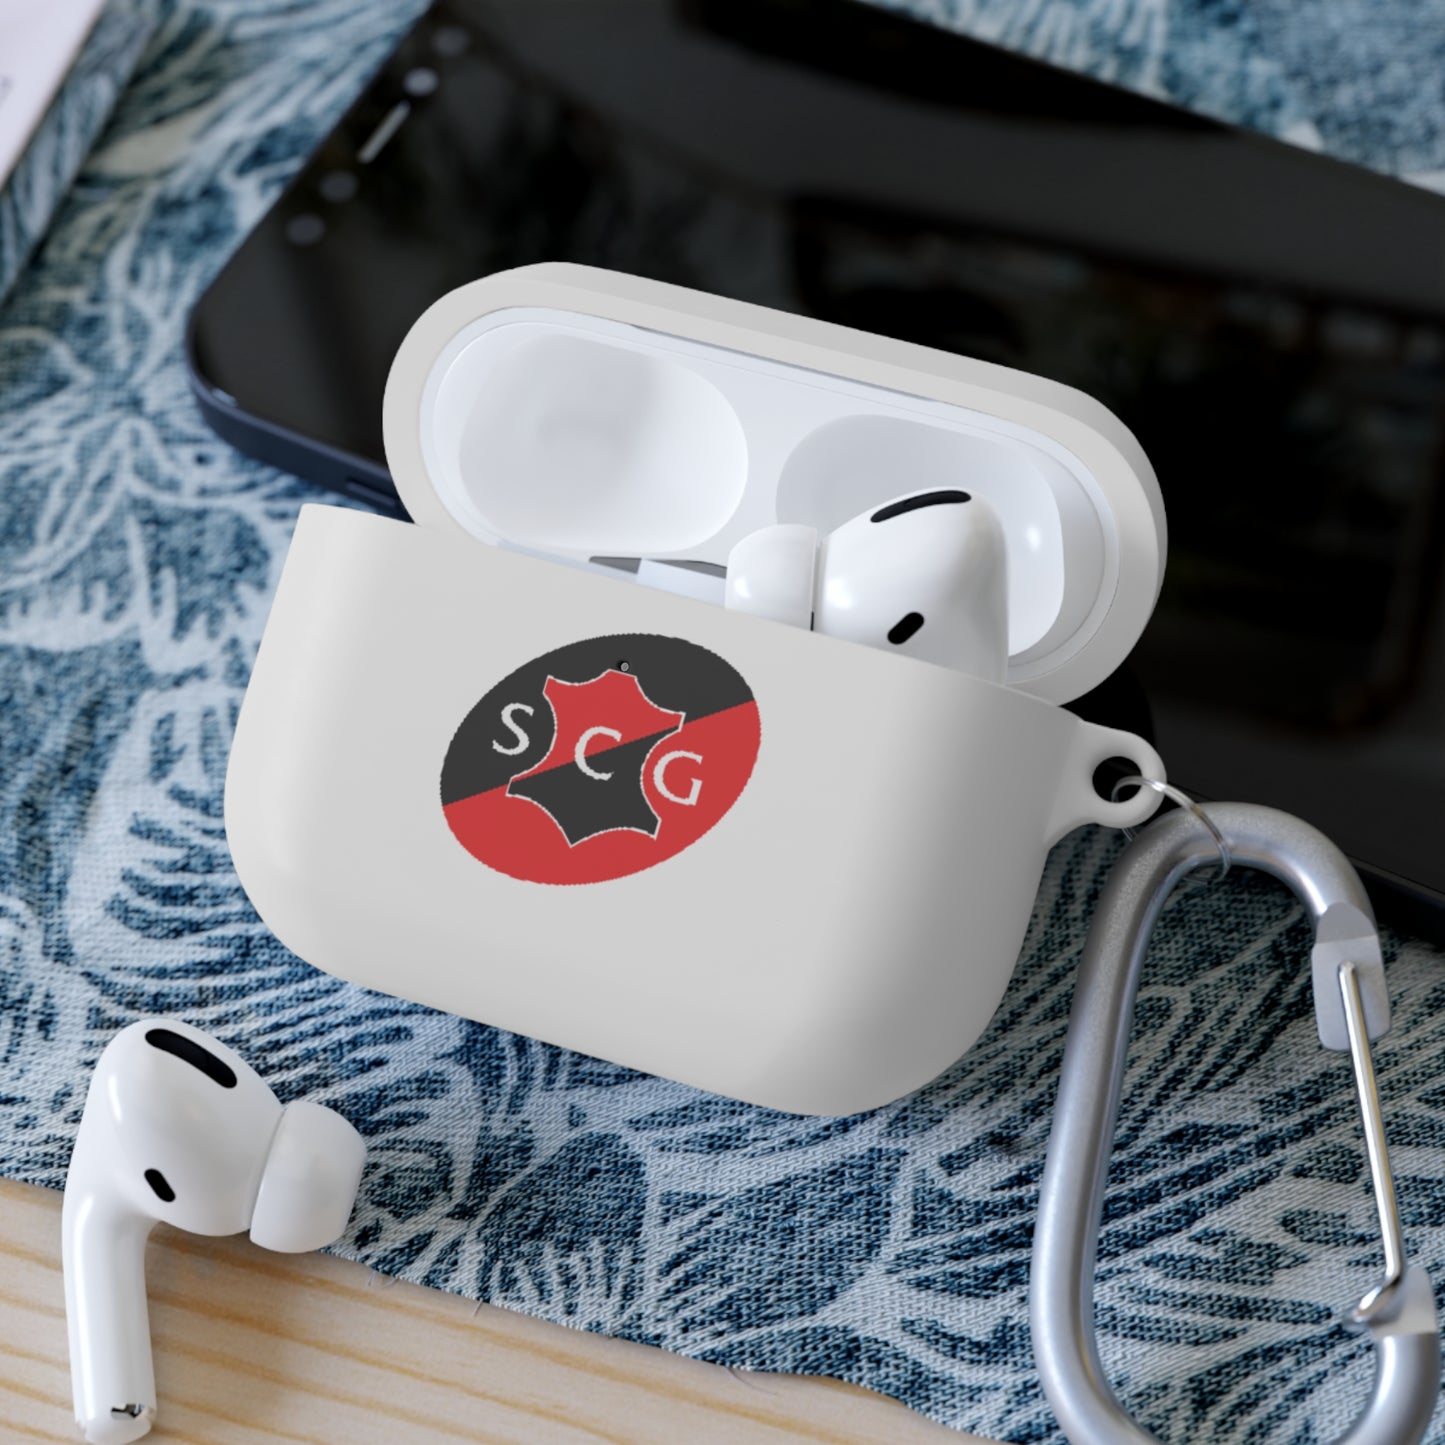 SC Graulhet AirPods and AirPods Pro Case Cover